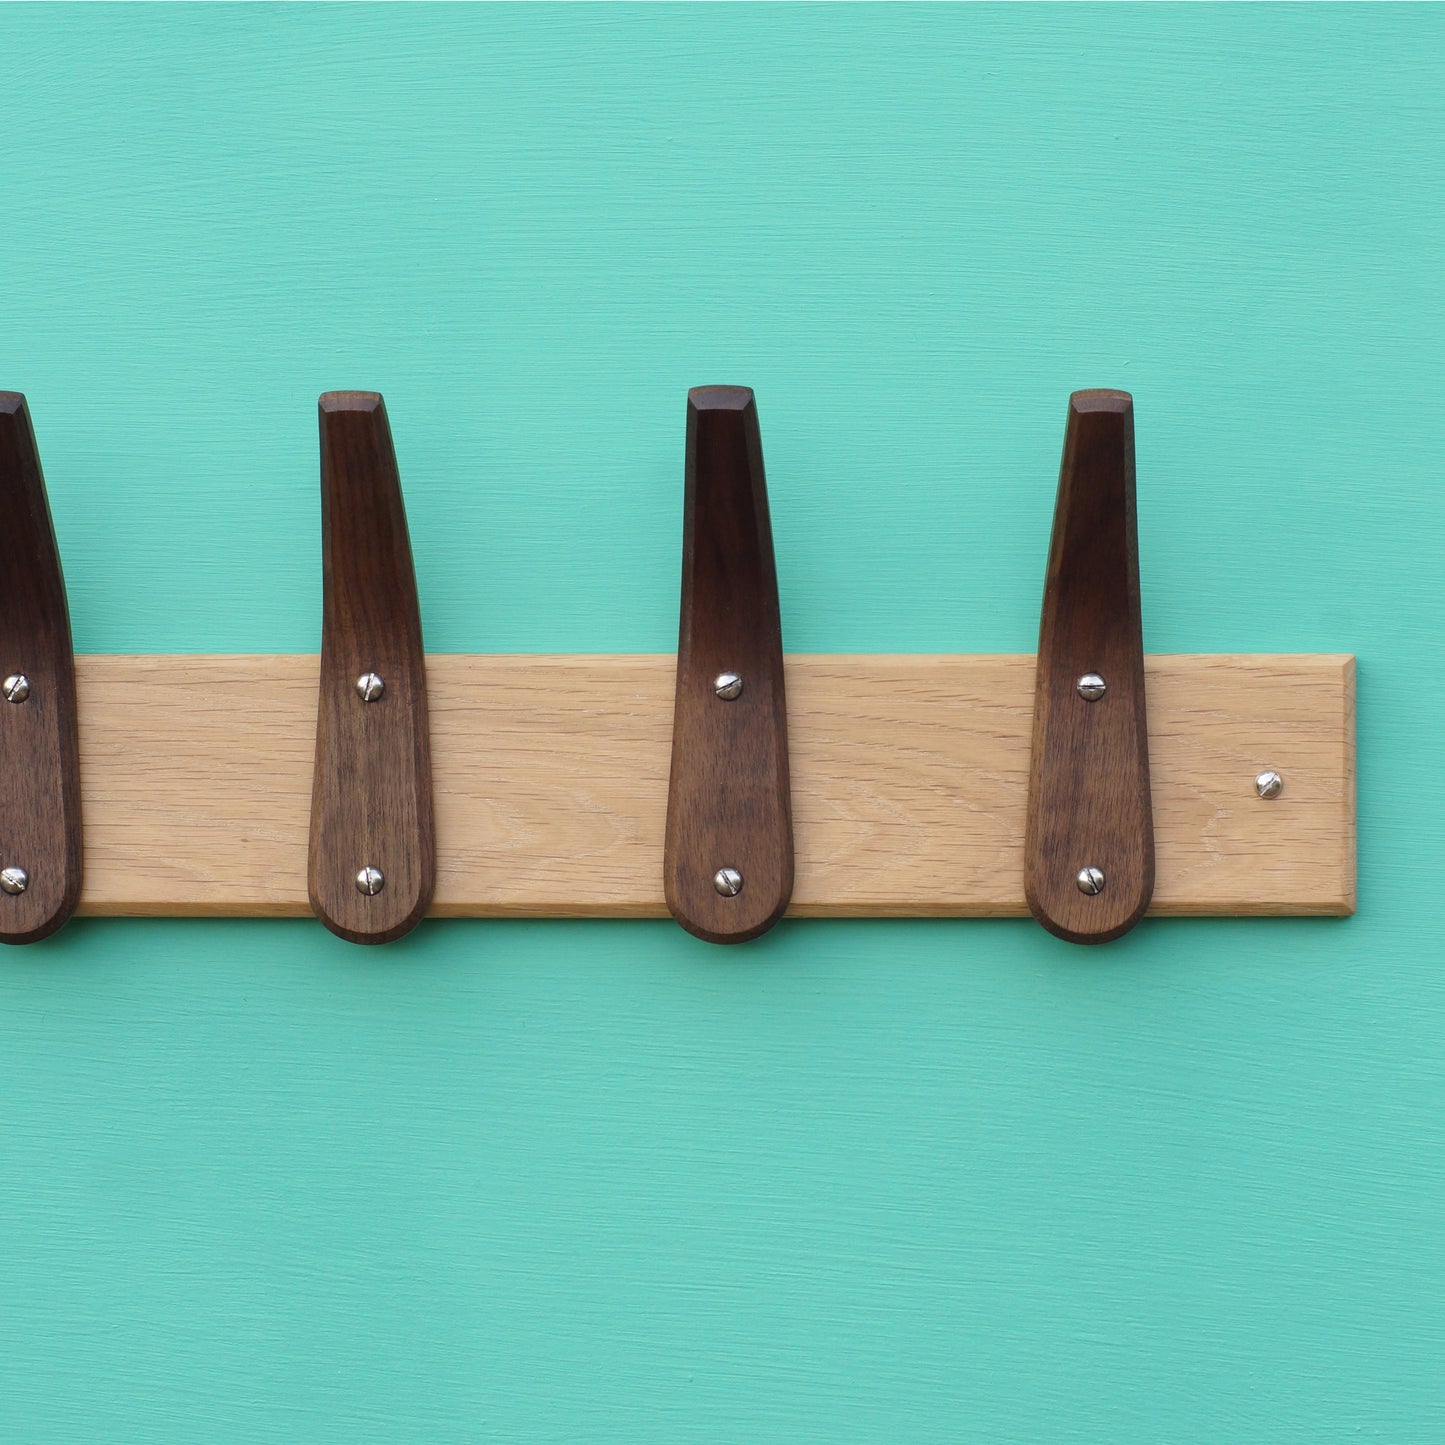 Coat hangers for wall. LayerTree.